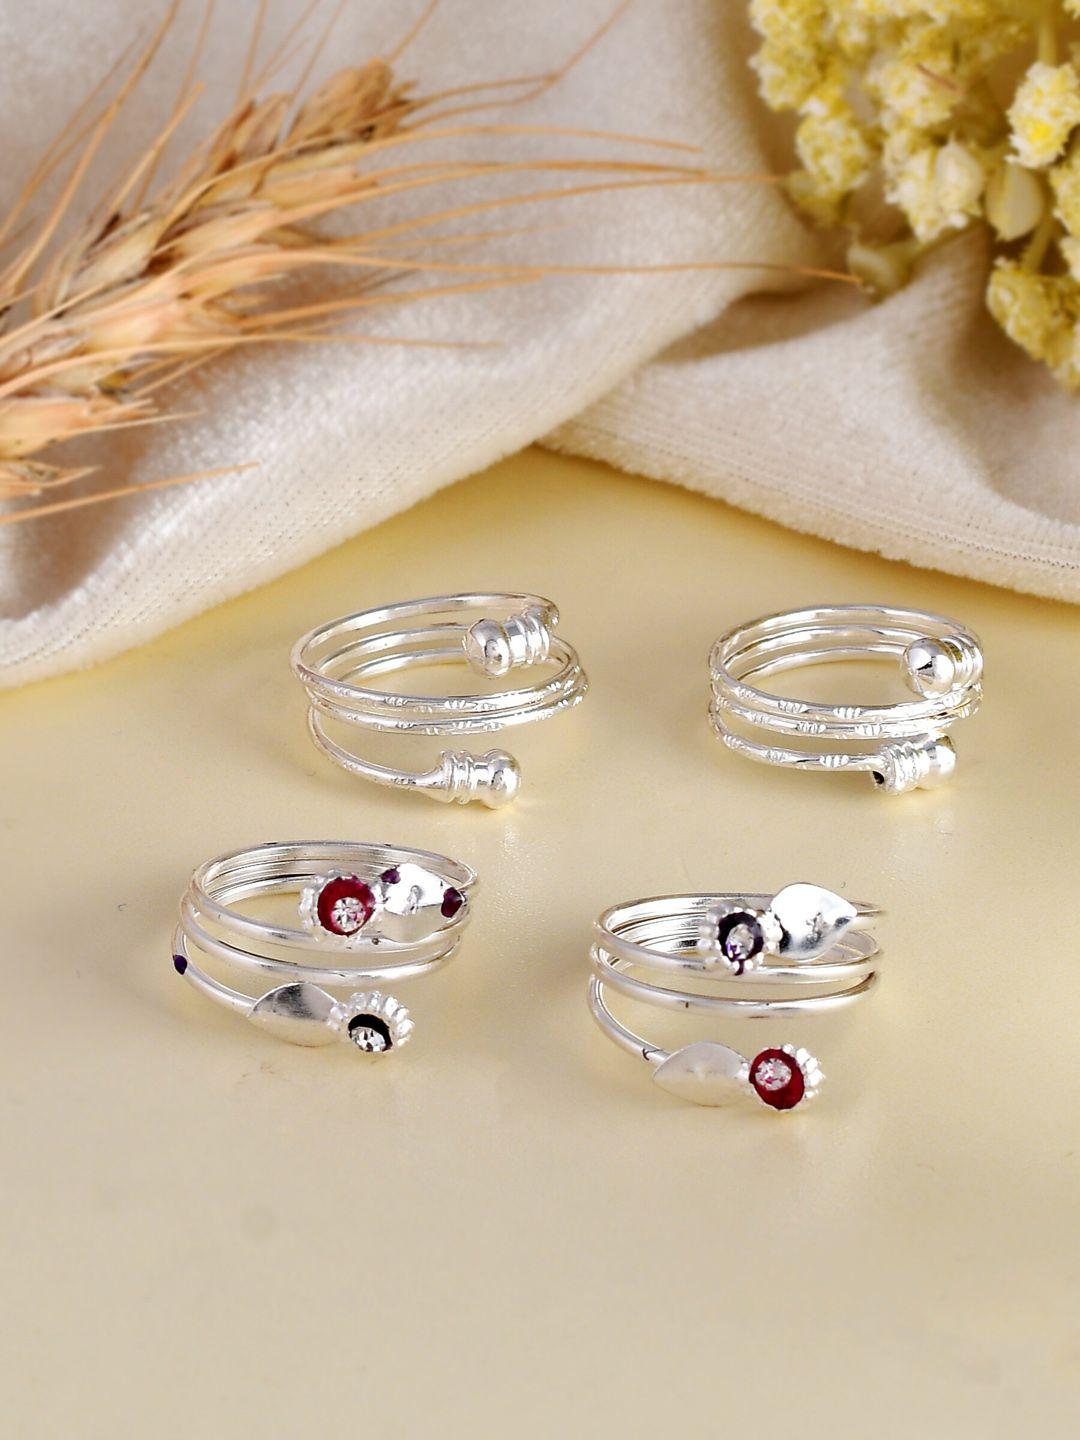 silvermerc designs set of 4 silver-plated cubic zirconia studded toe rings